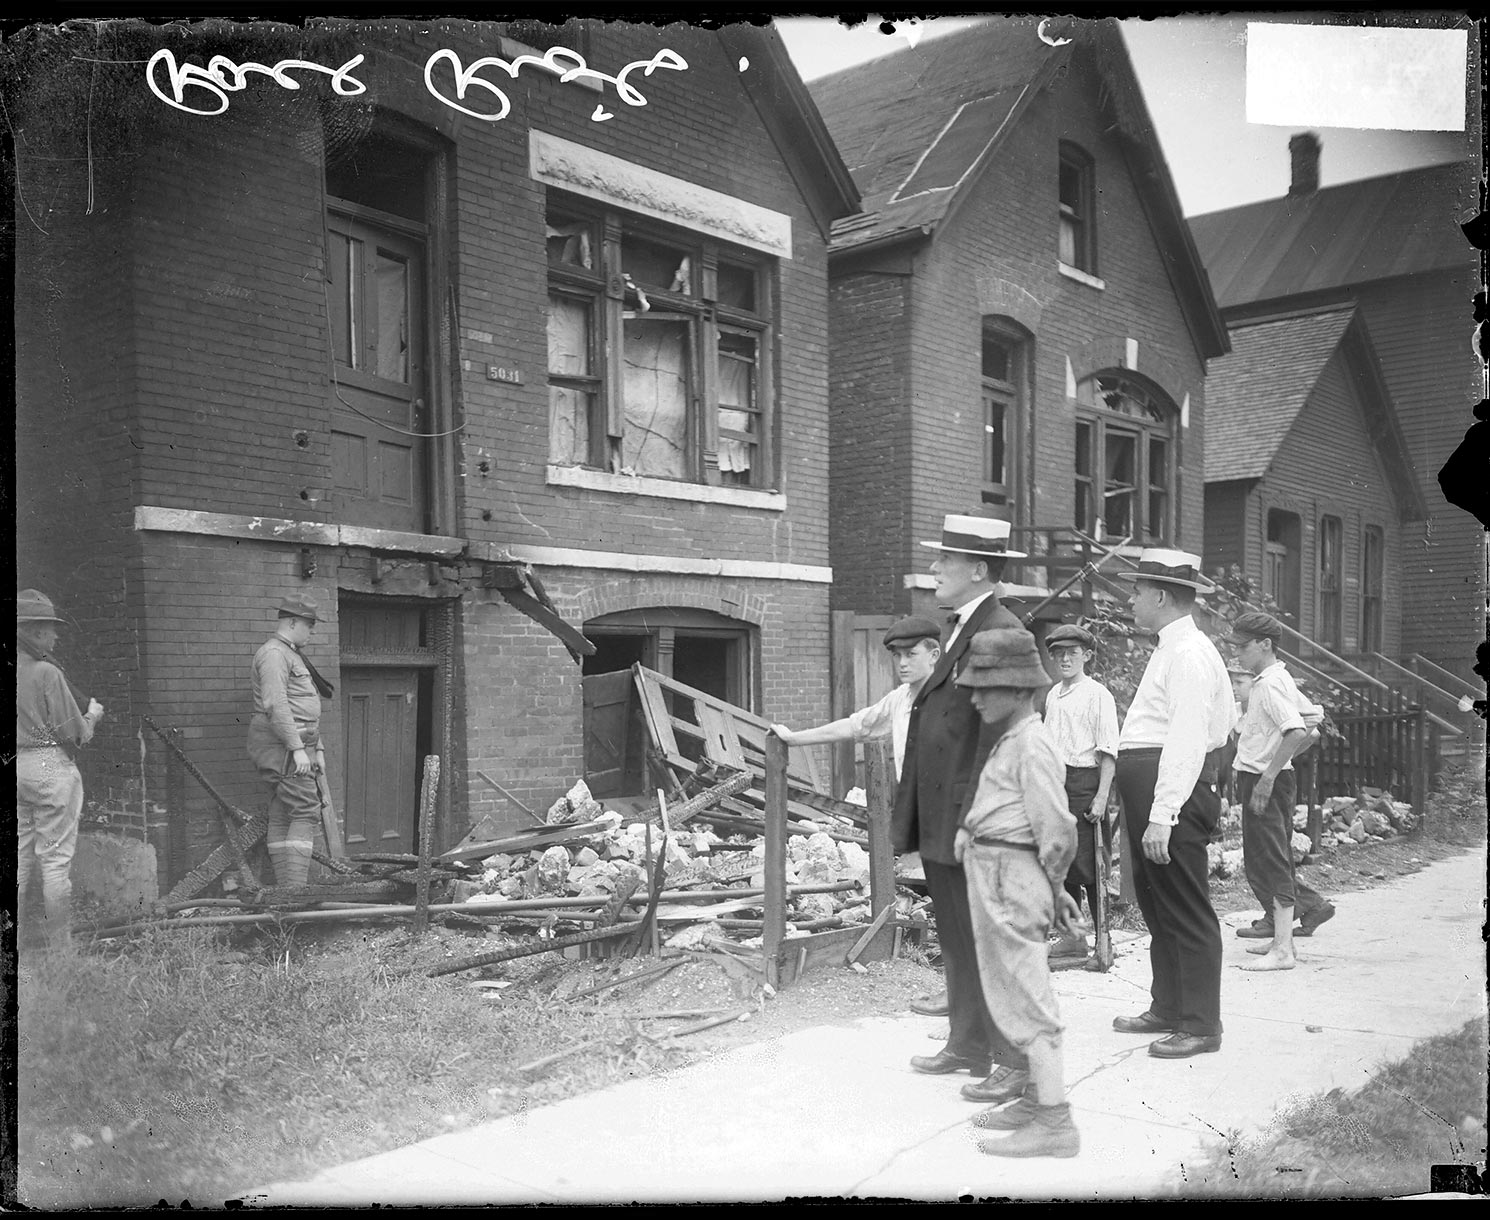  pequeñas curiosidades  - Página 22 A-group-of-white-men-and-boys-examine-the-destroyed-homes-of-black-Chicago-residents-after-the-citys-1919-riot